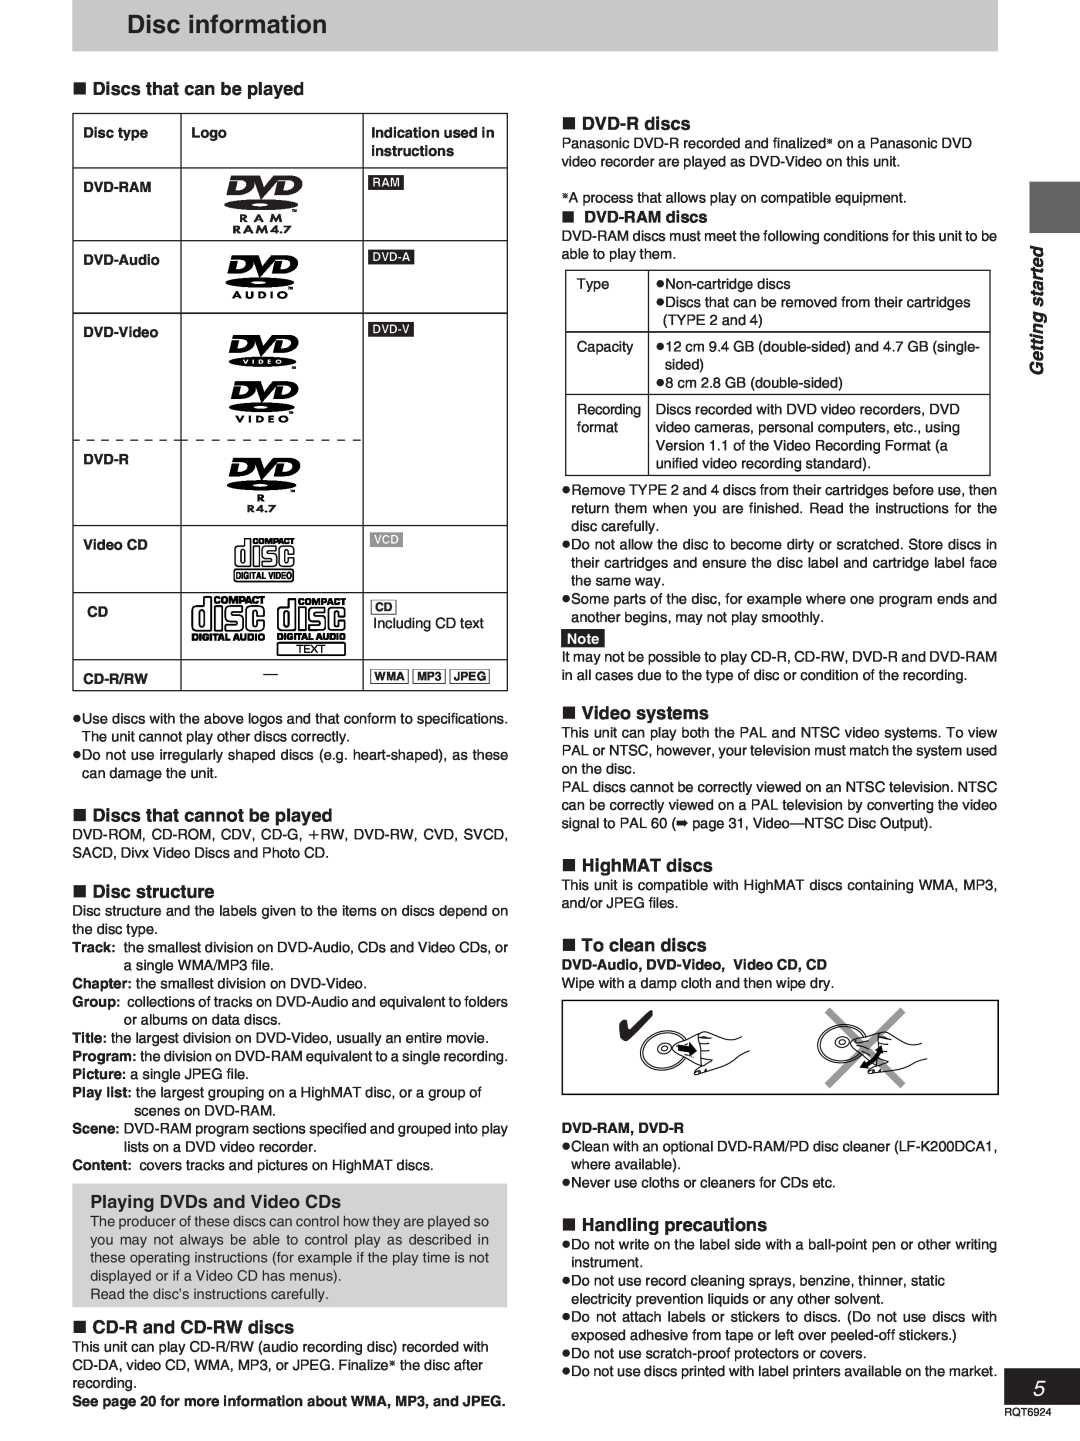 Panasonic SC-DT310 manual Disc information, Getting started 